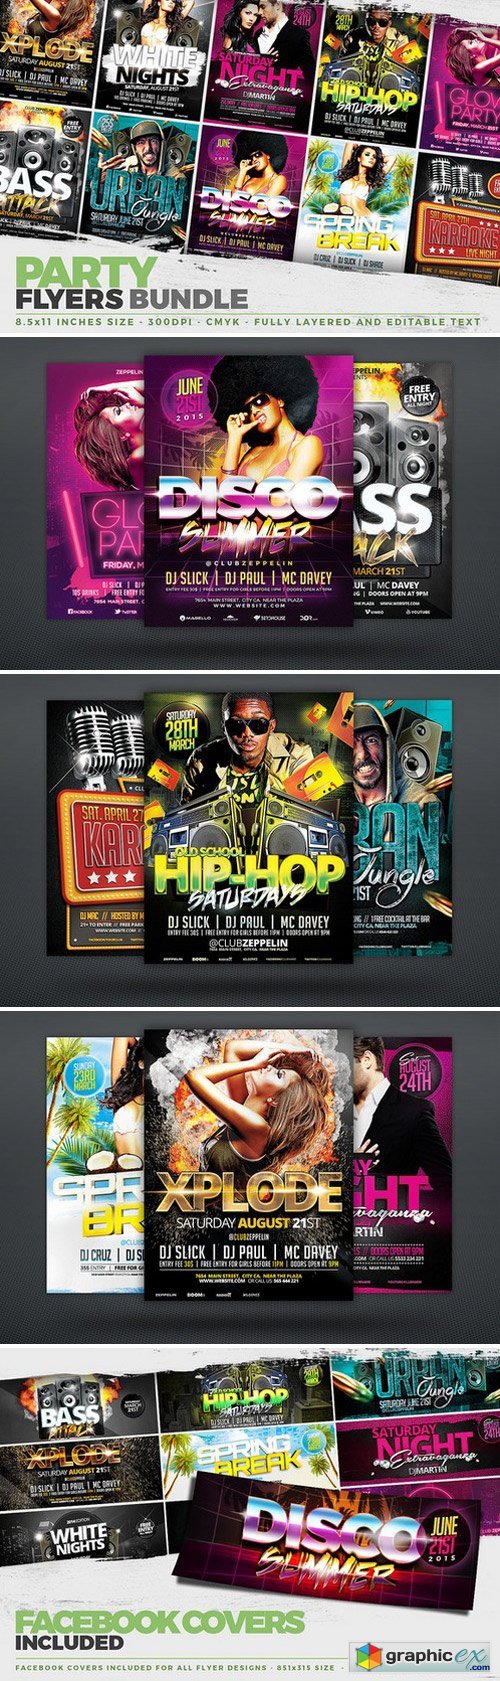 10 Party Flyer Templates + FB Covers